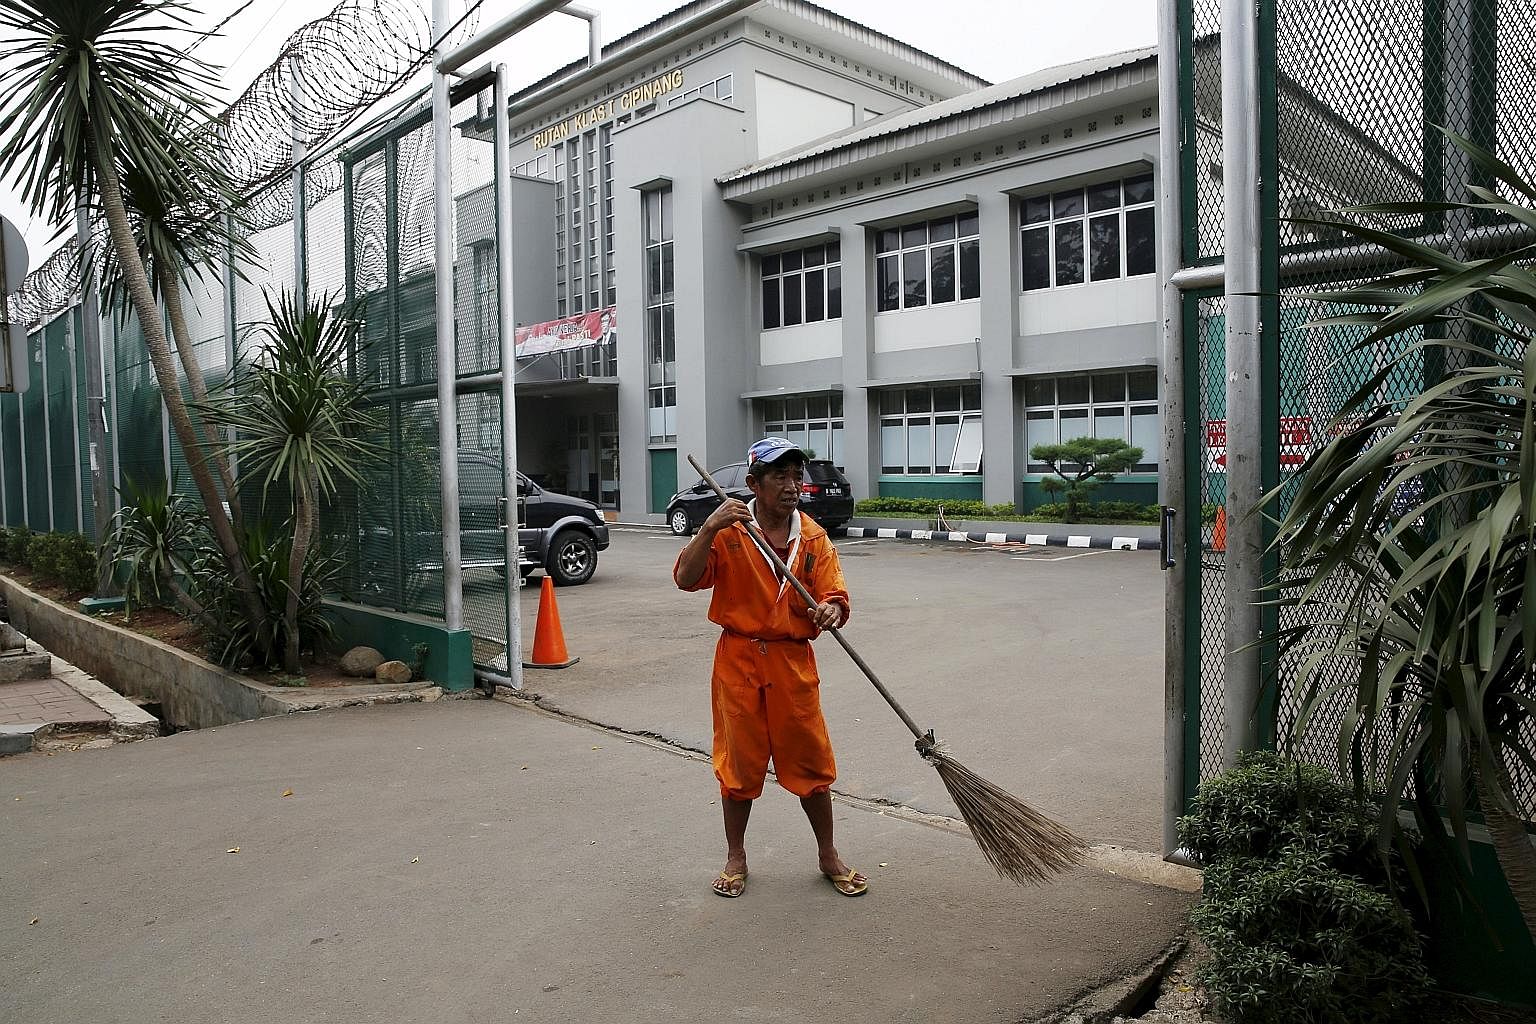 Cipinang Prison, where some of Indonesia's leading terrorists have at one time or another been jailed, is one of the few prisons in Indonesia that technically segregates terrorist inmates from other offenders. But it is perpetually overcrowded and, w